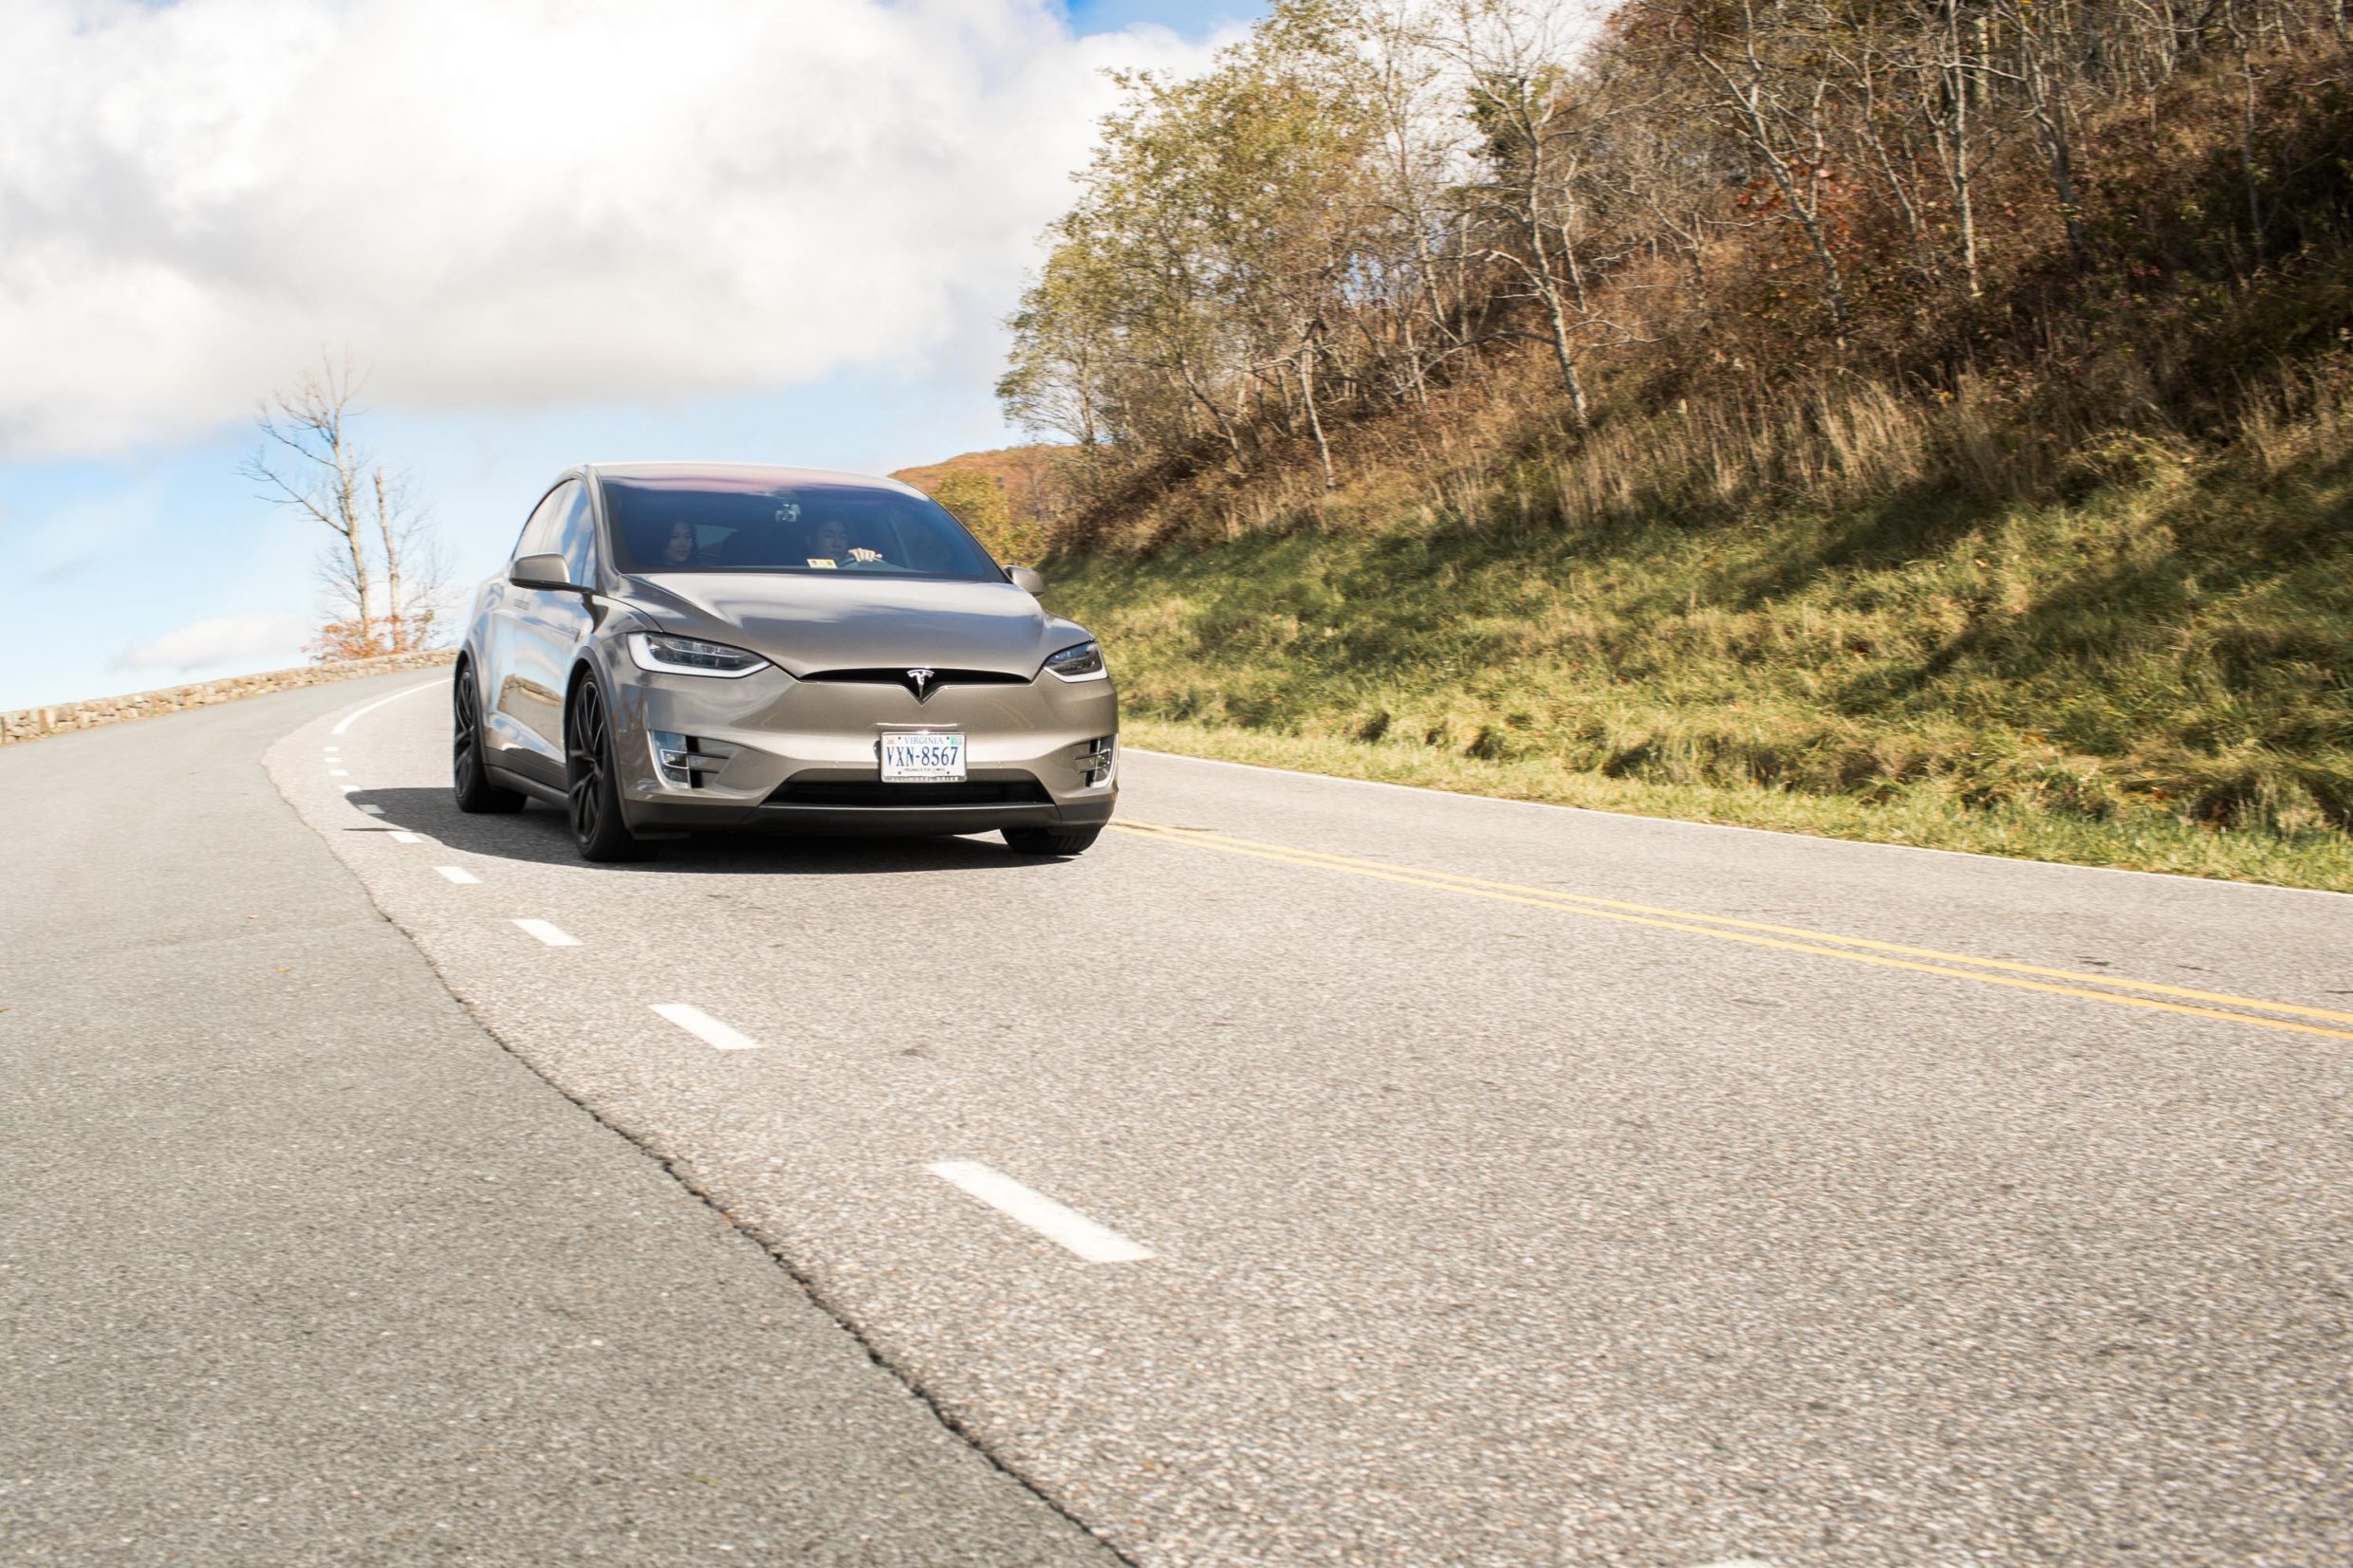 Driving a Tesla Model X into the Virginia Mountains and Shenandoah National Park